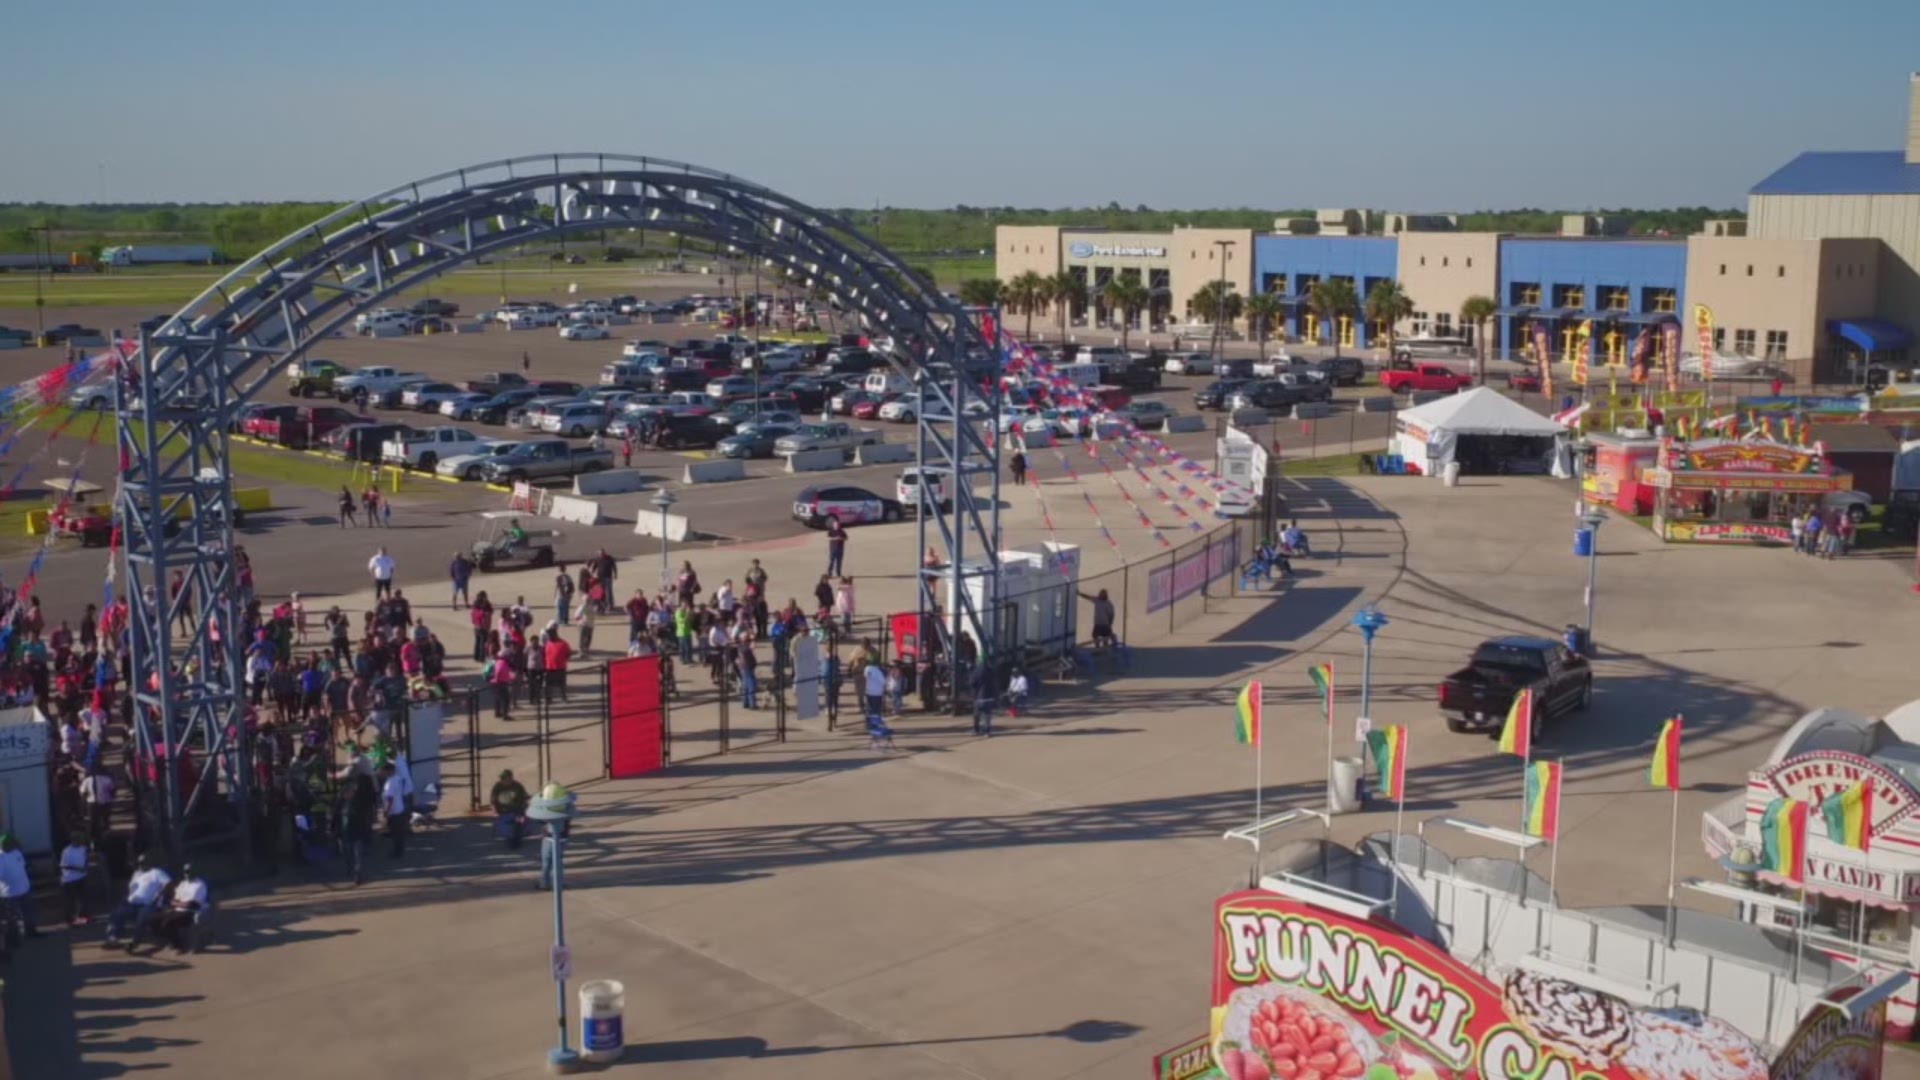 The 12News Drone was in the air for the opening of the 2018 South Texas State Fair. Watch from above as the gates open.